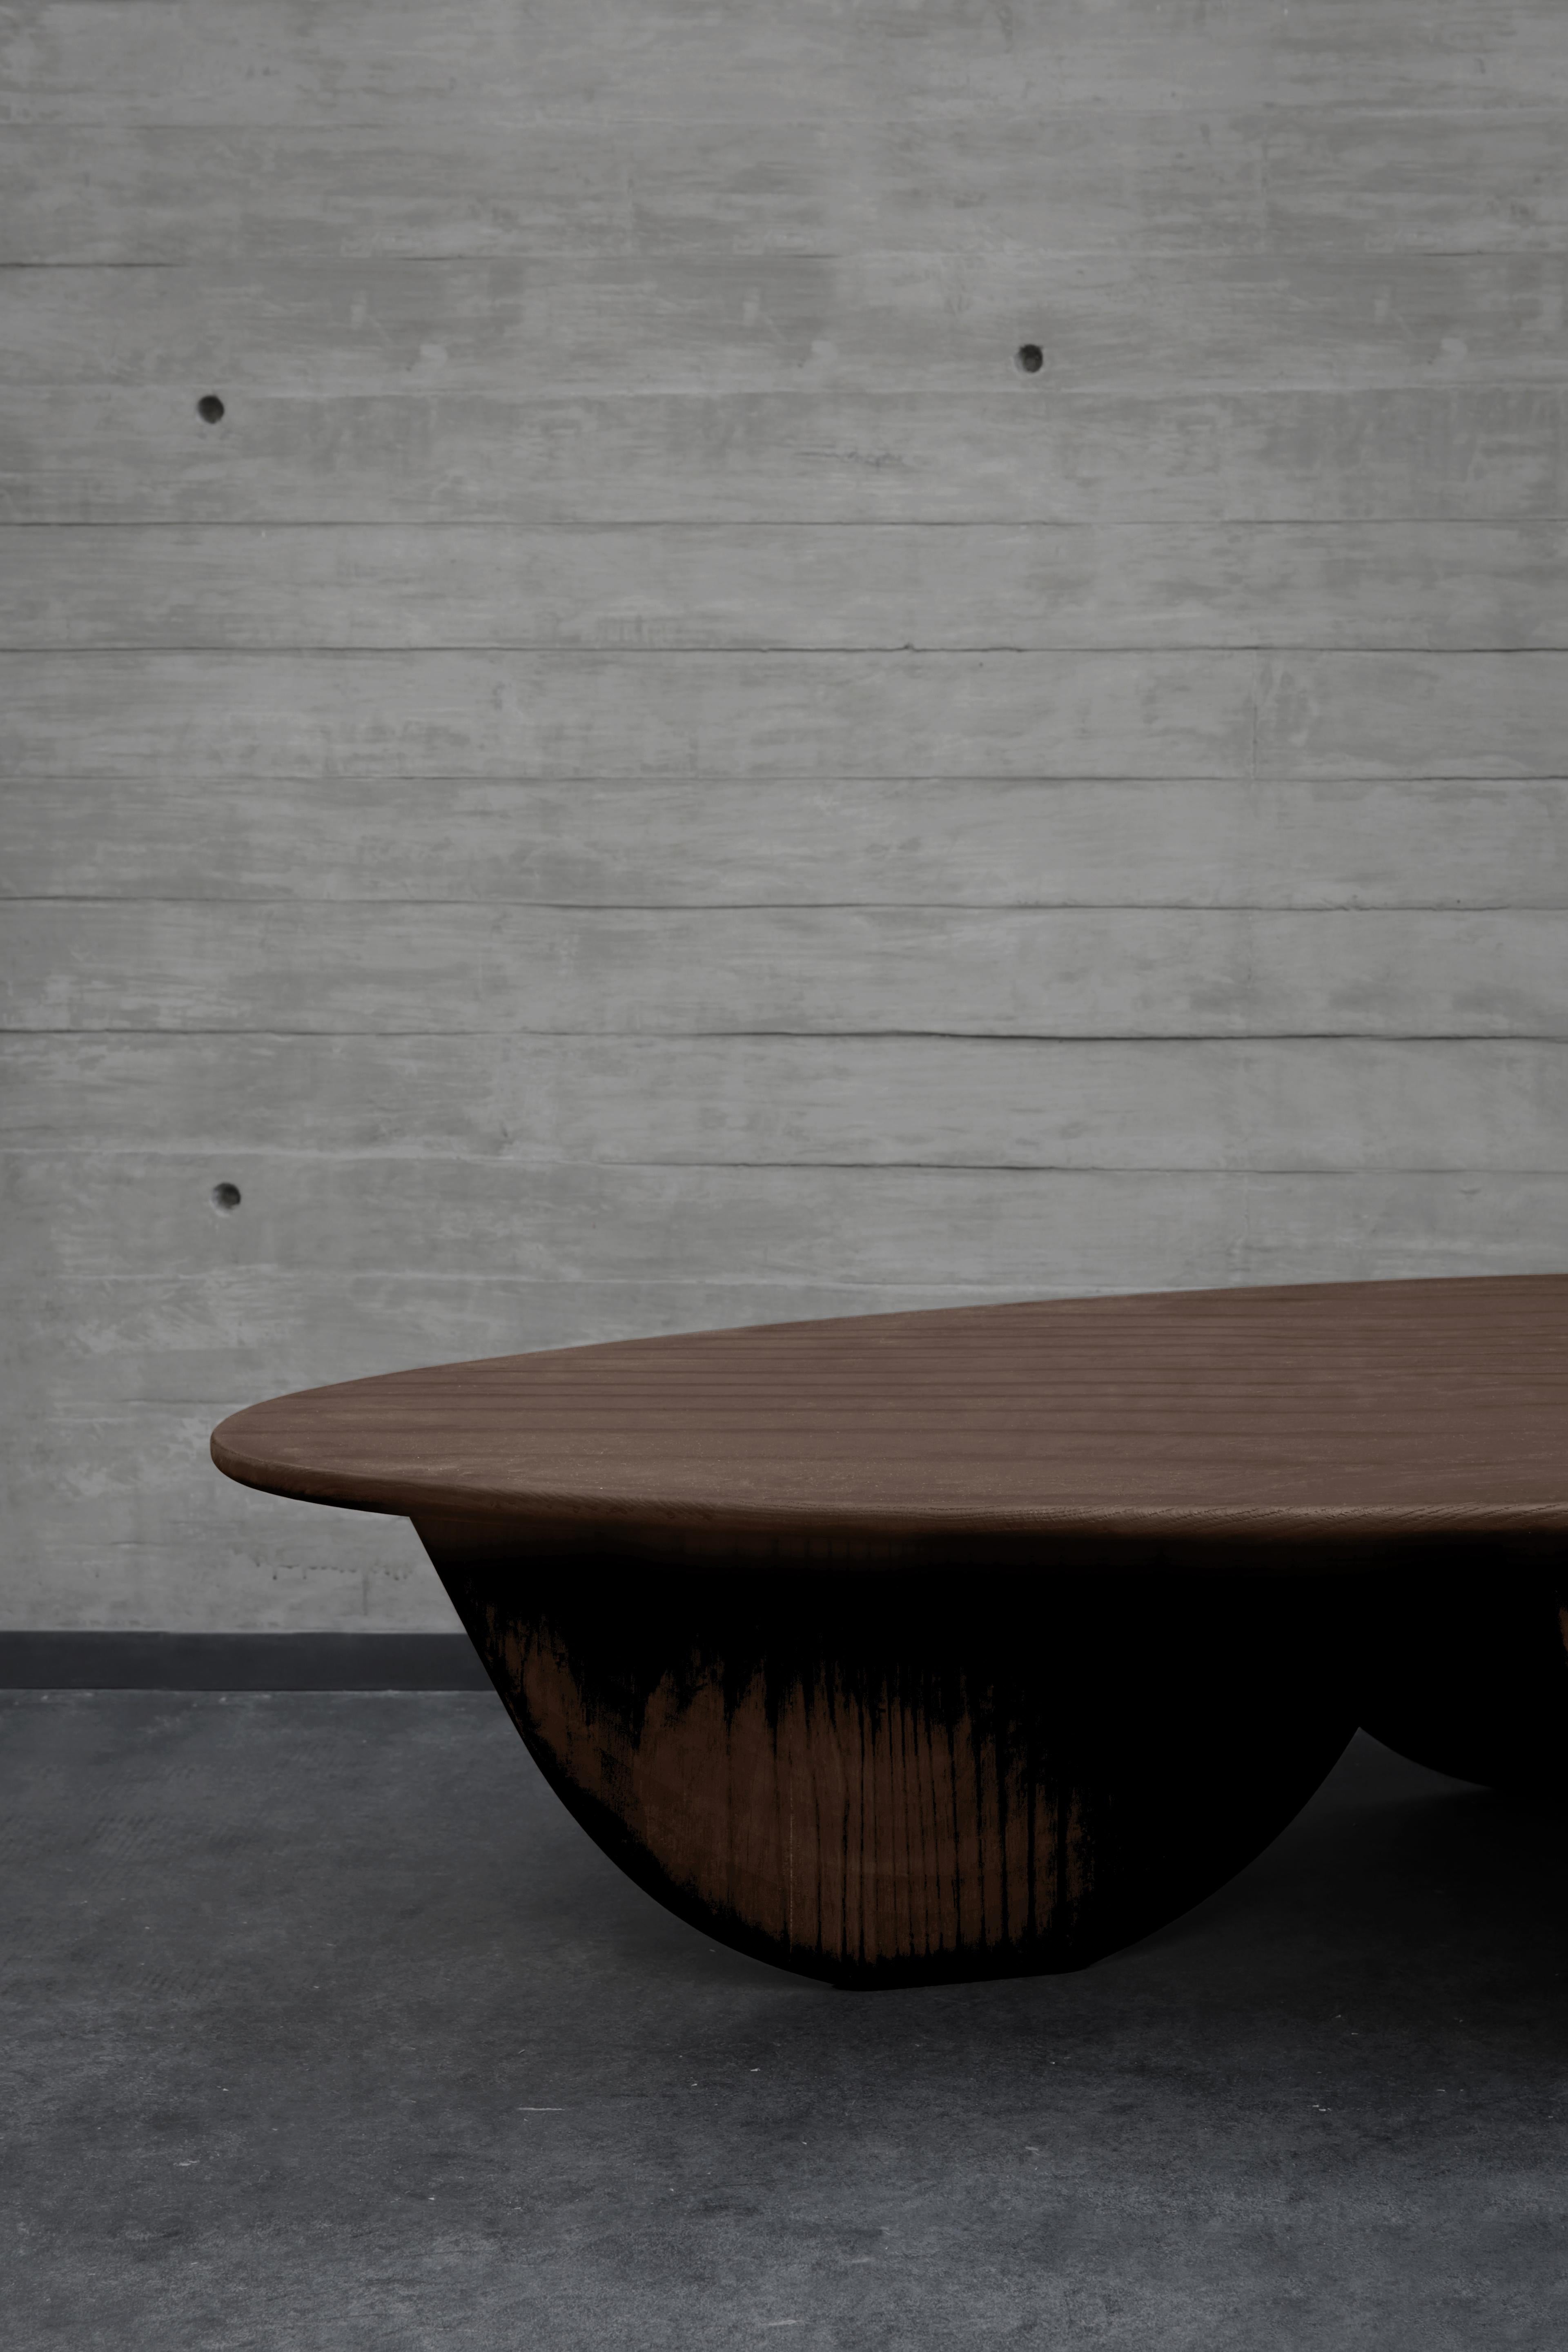 Contemporary Noviembre x Big Coffee Table in Walnut Wood Inspired by Brancusi, Coffee Table